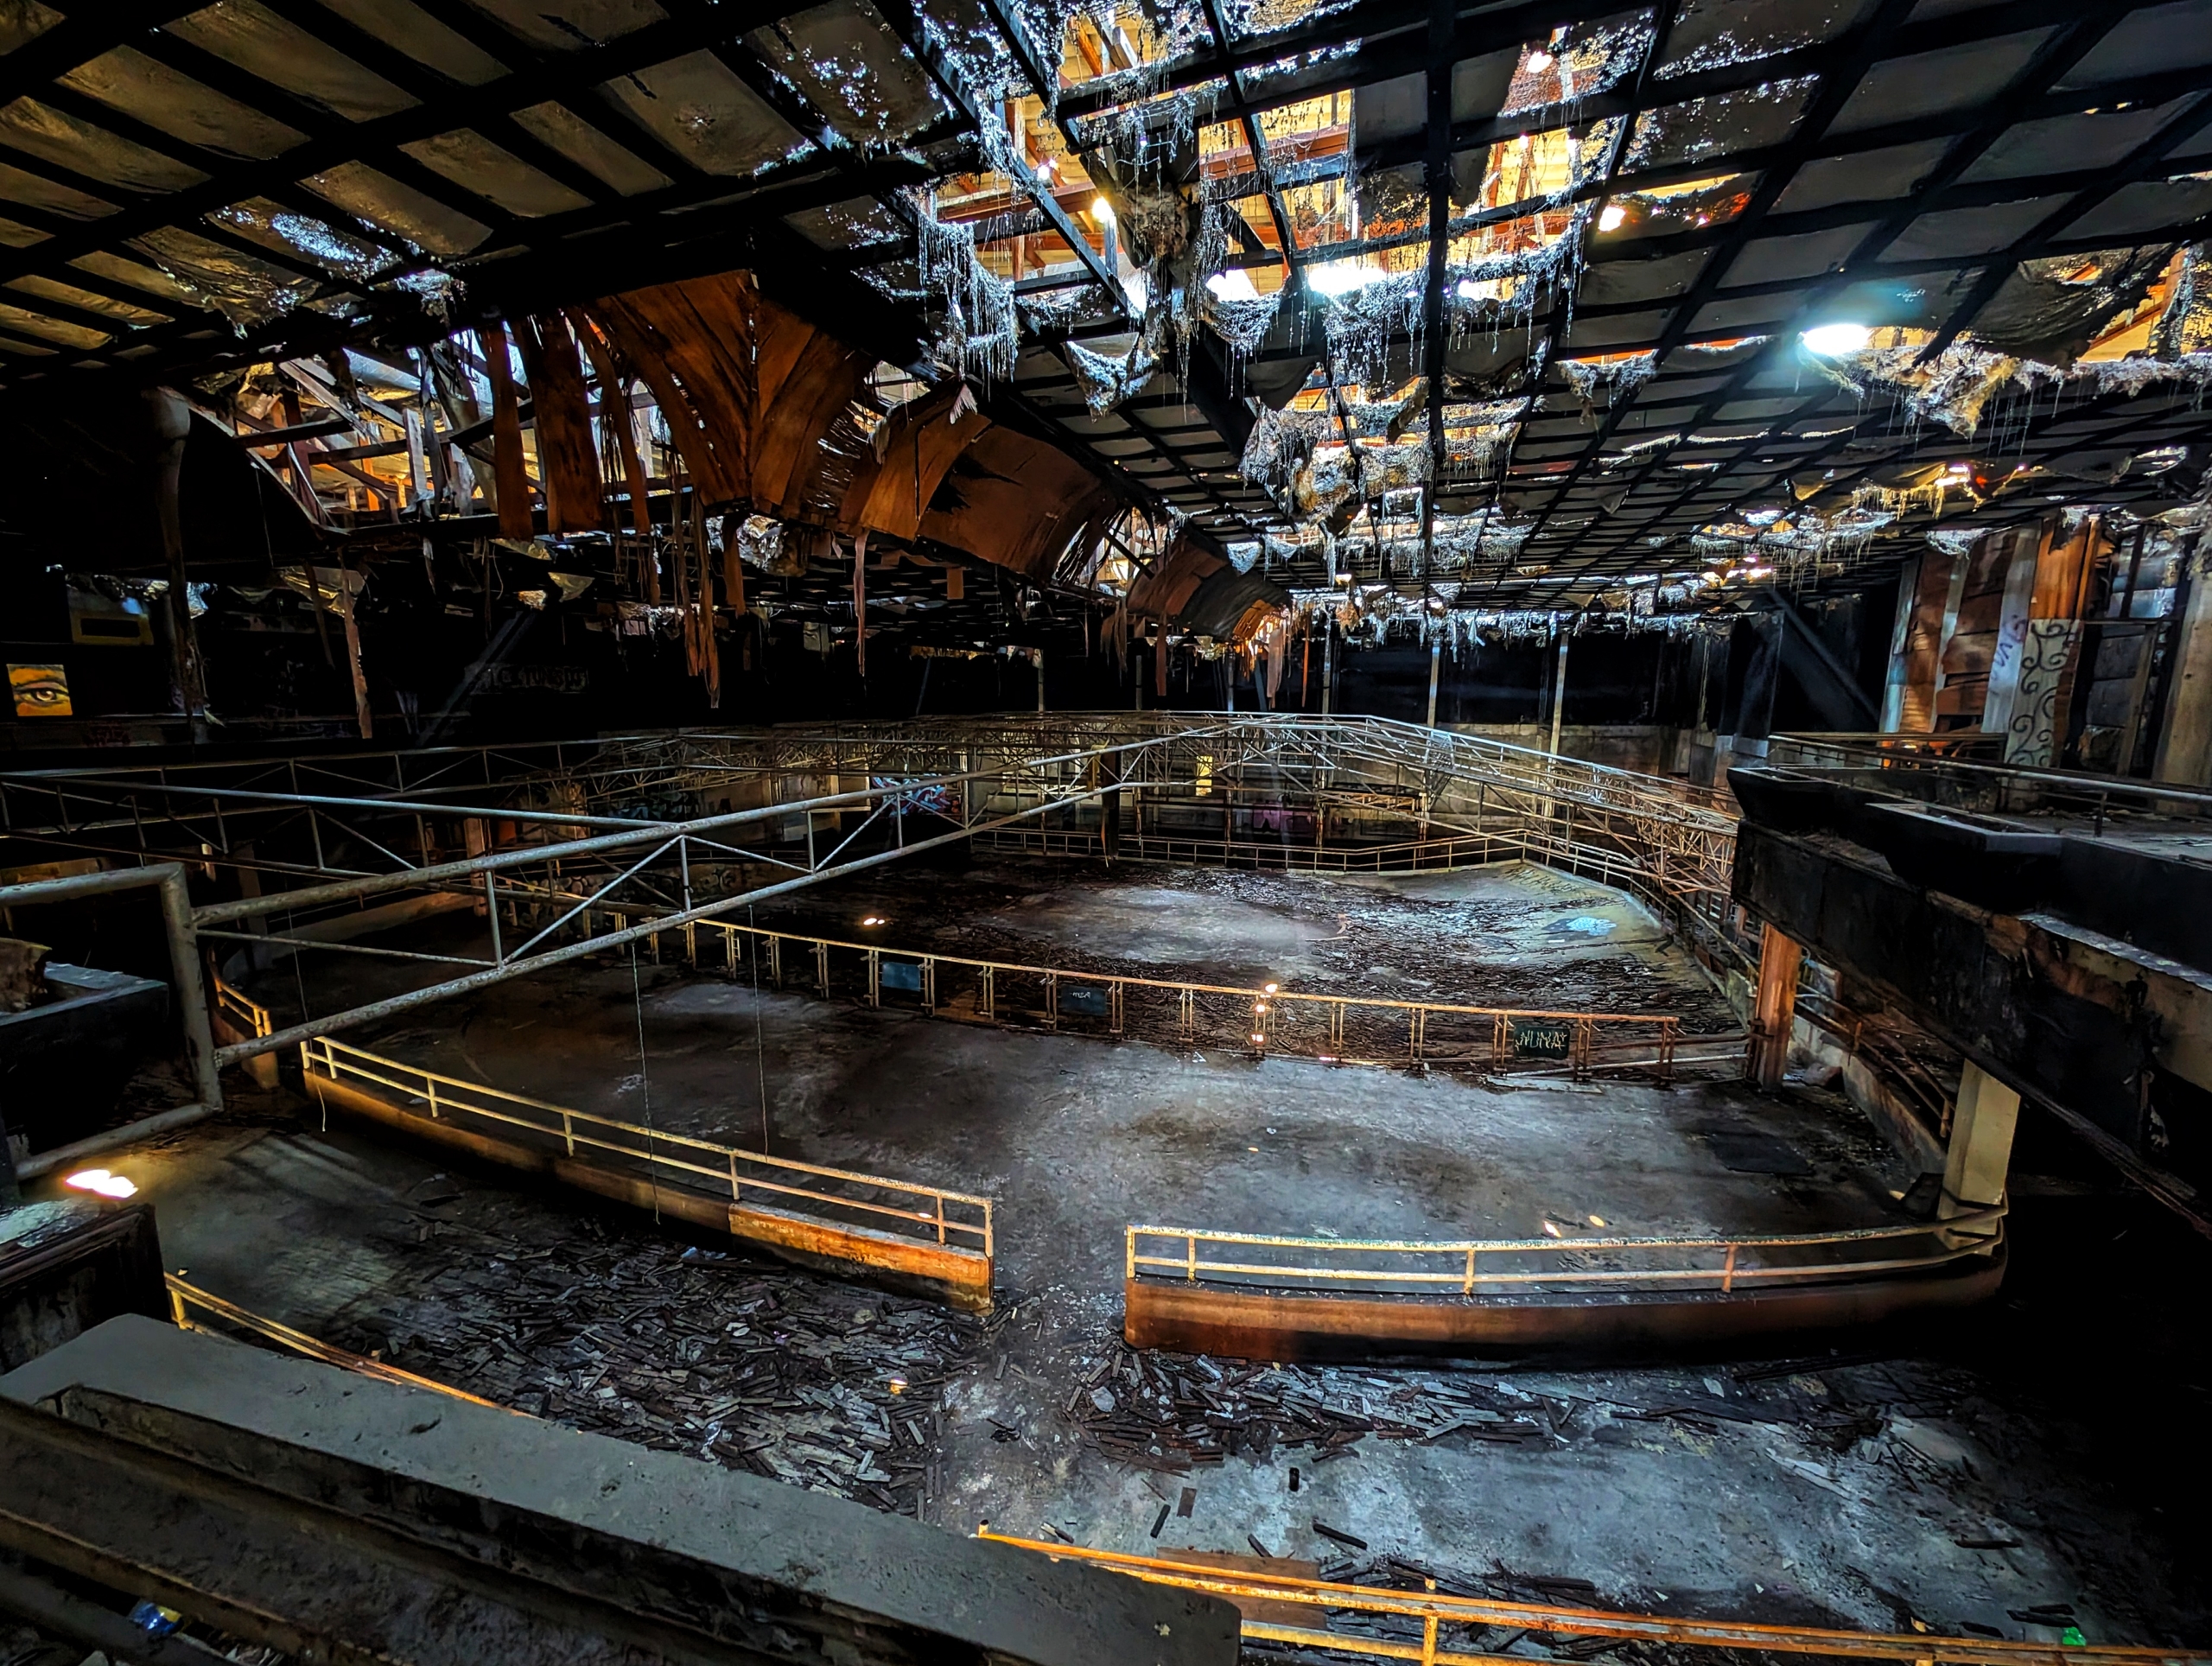 The Abandoned Space Roller Rink in Chiang Mai, Thailand